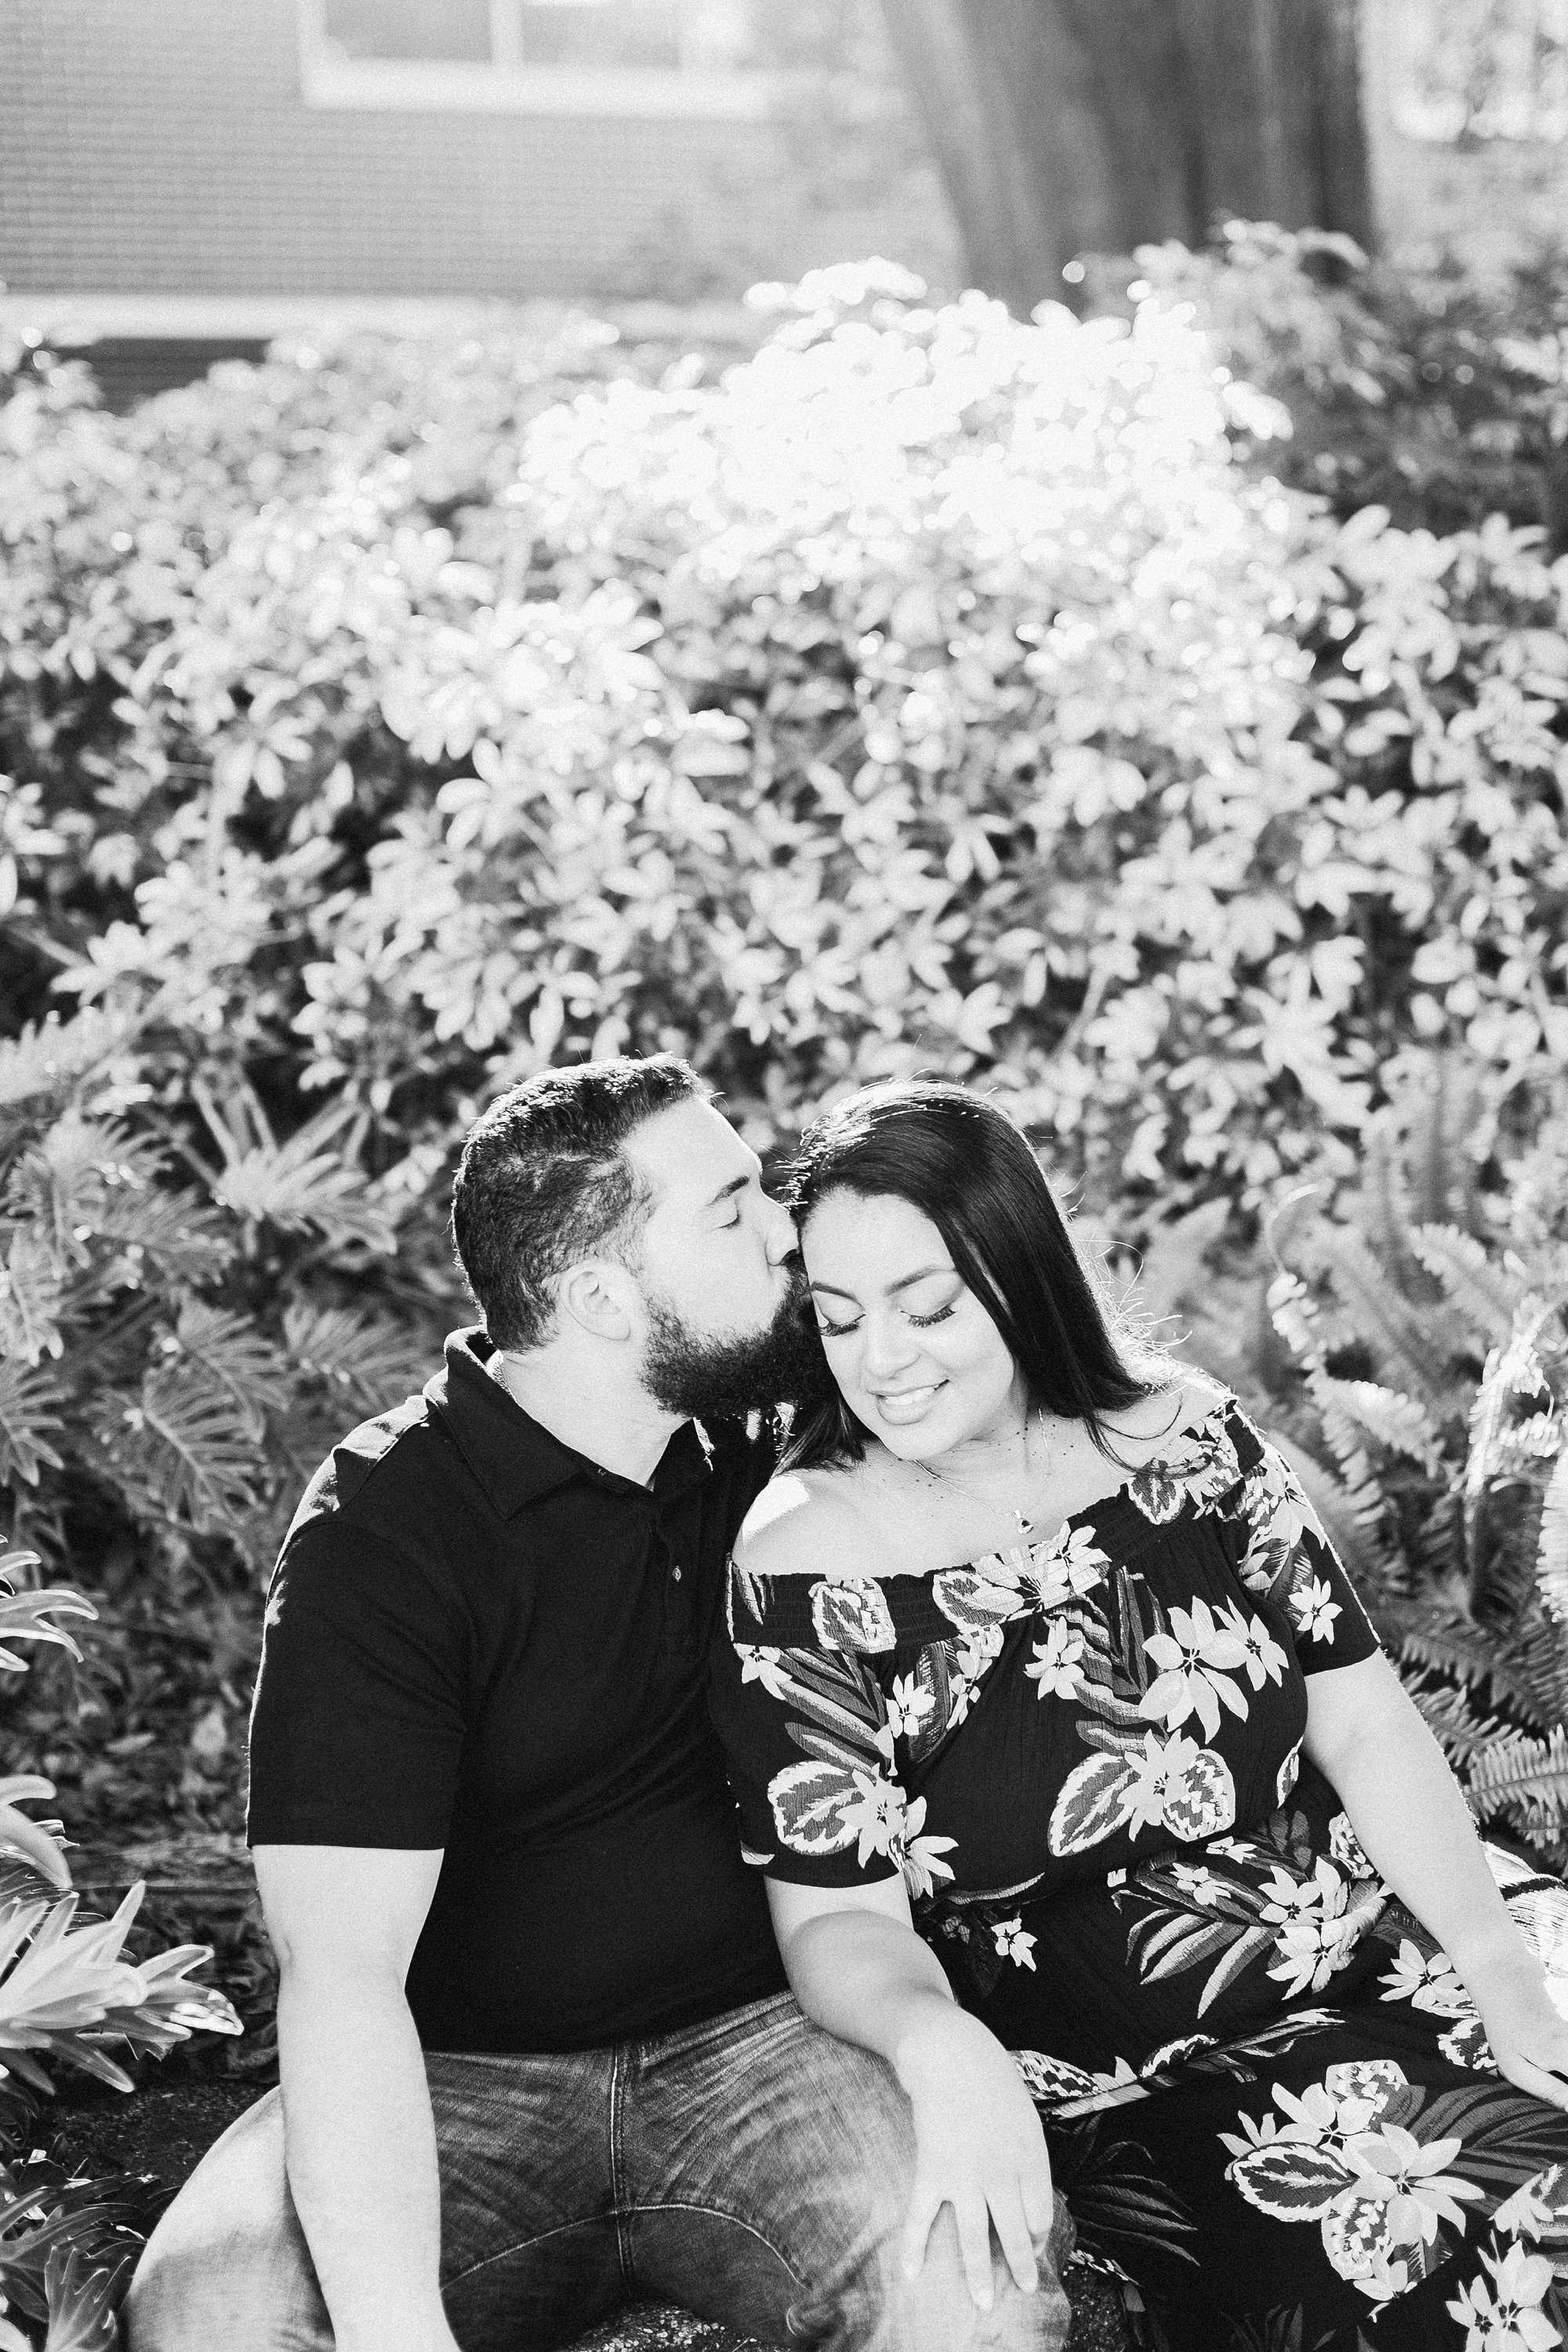 Tampa Engagement | © Ailyn La Torre Photography 2019